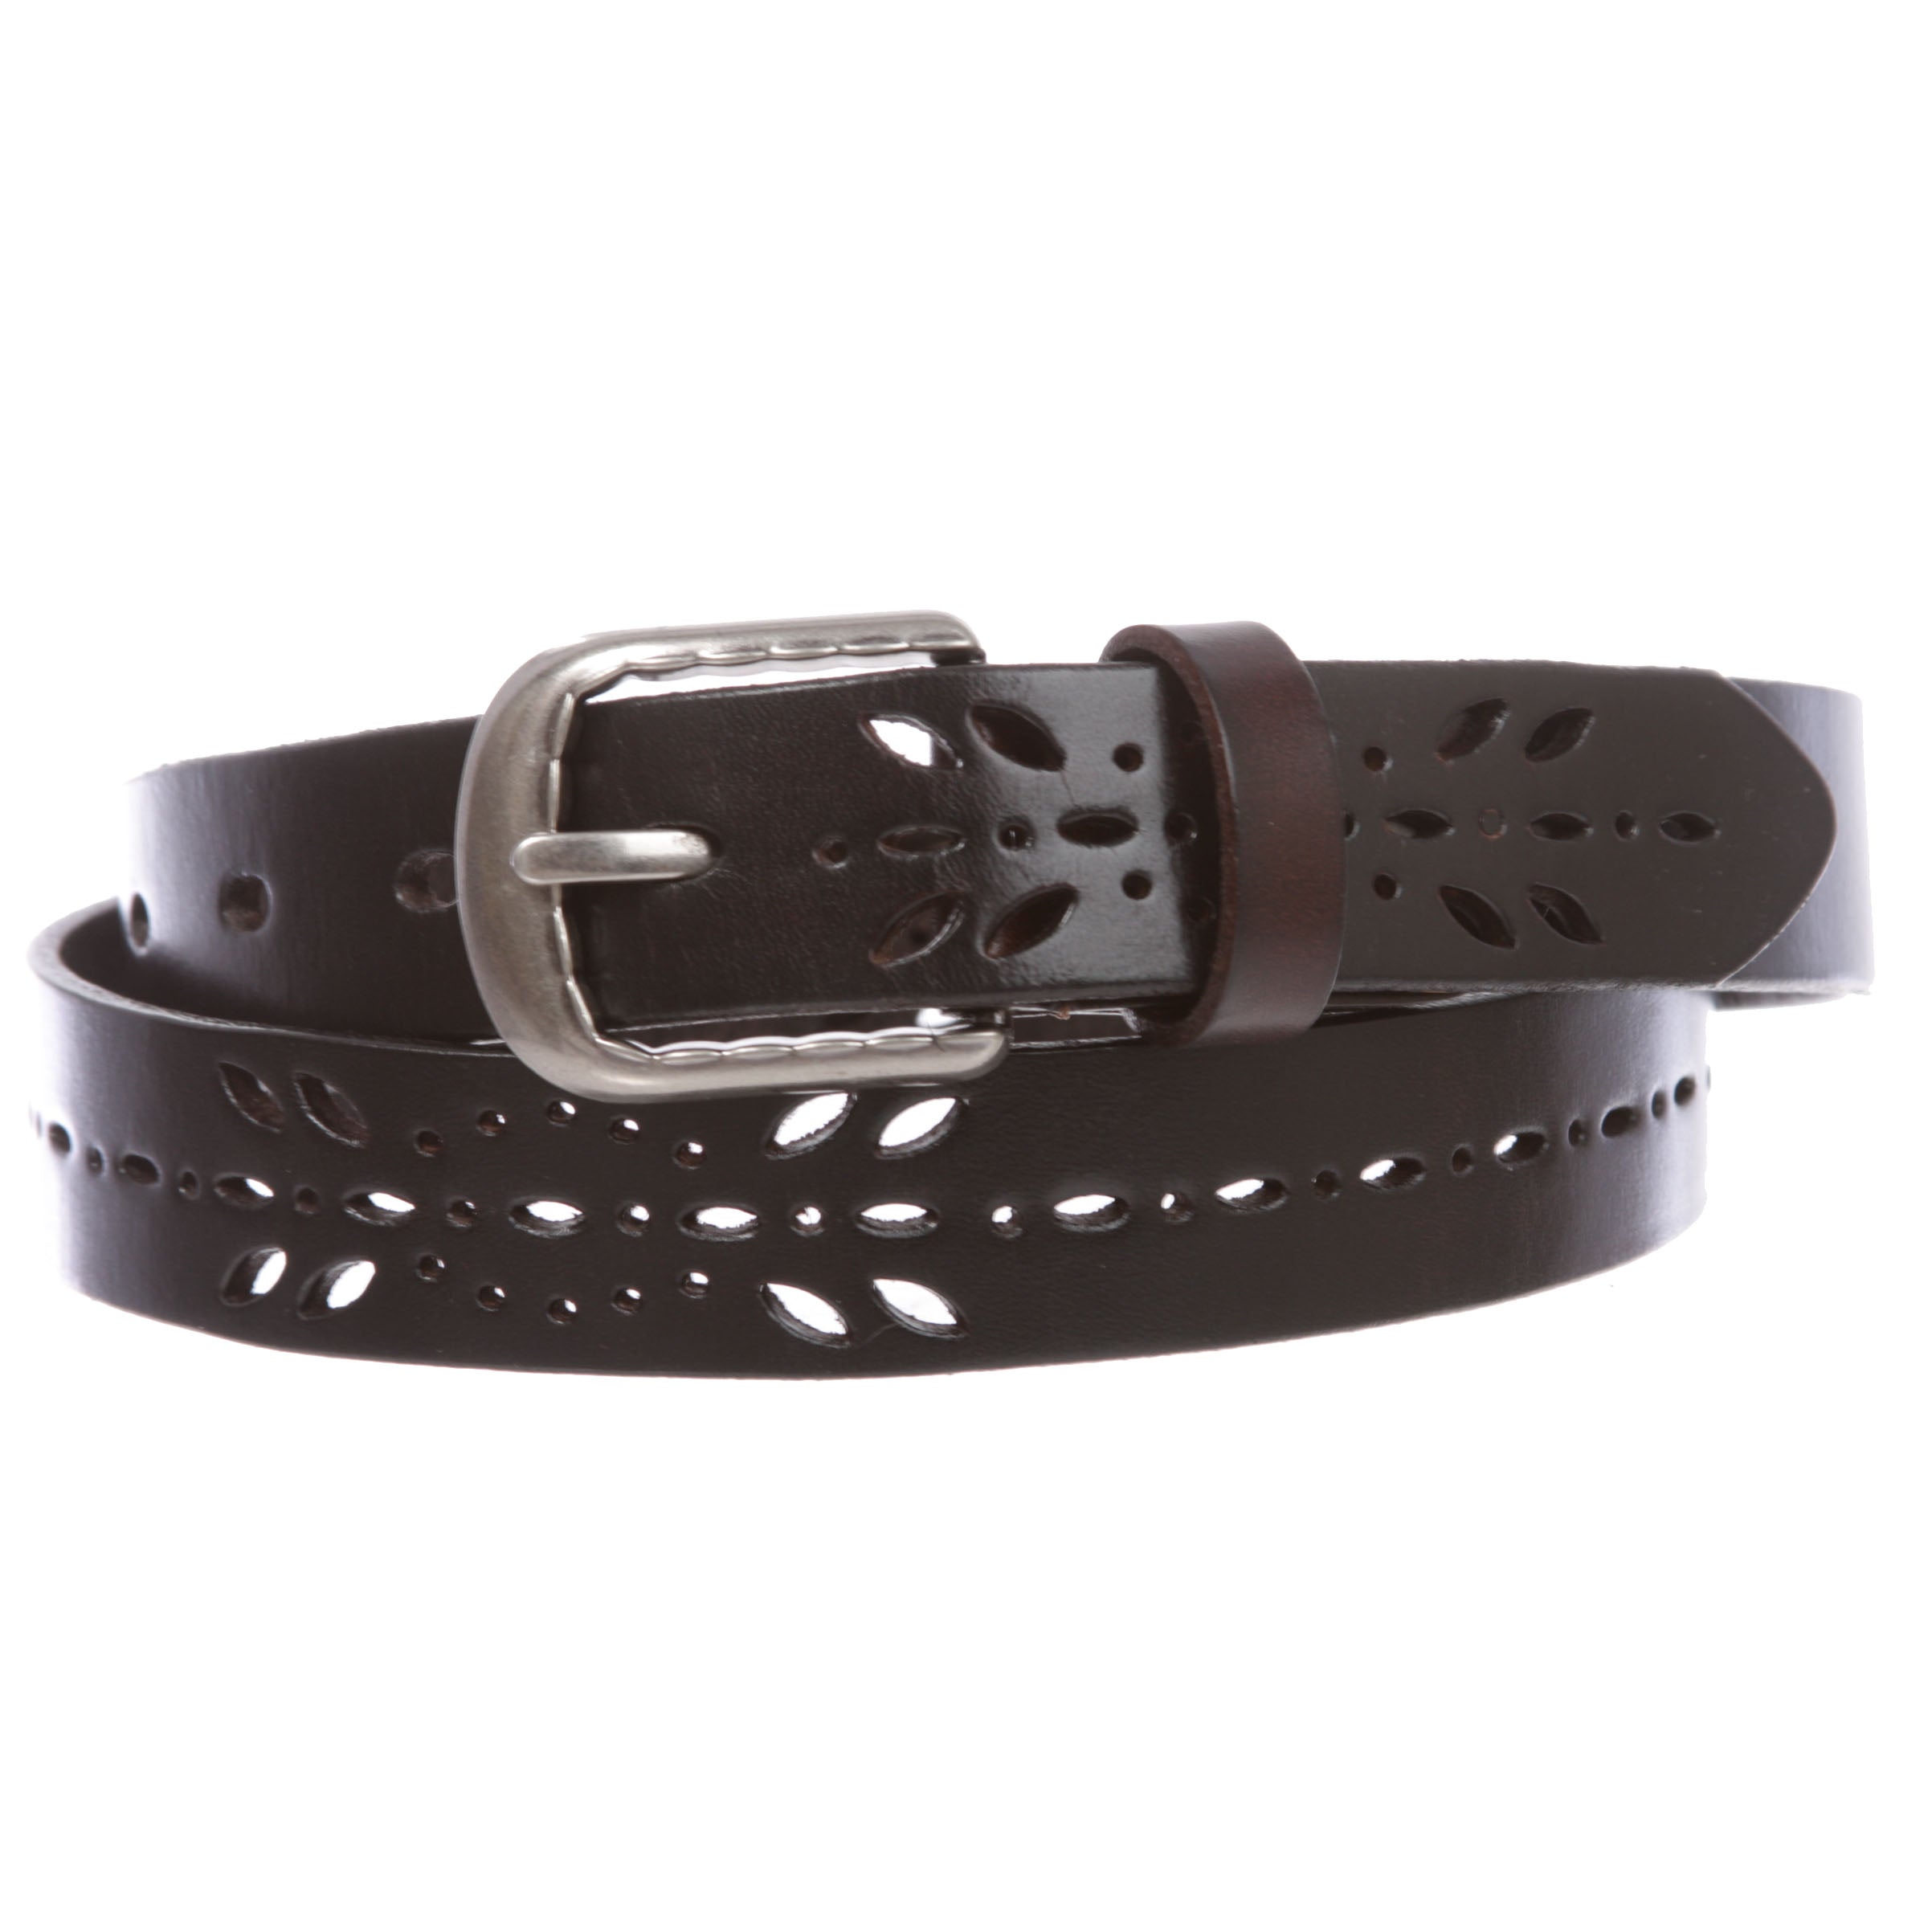 Women's 1 1/8" (28 mm) Perforated Cowhide Full Grain Leather Casual Jean Belt